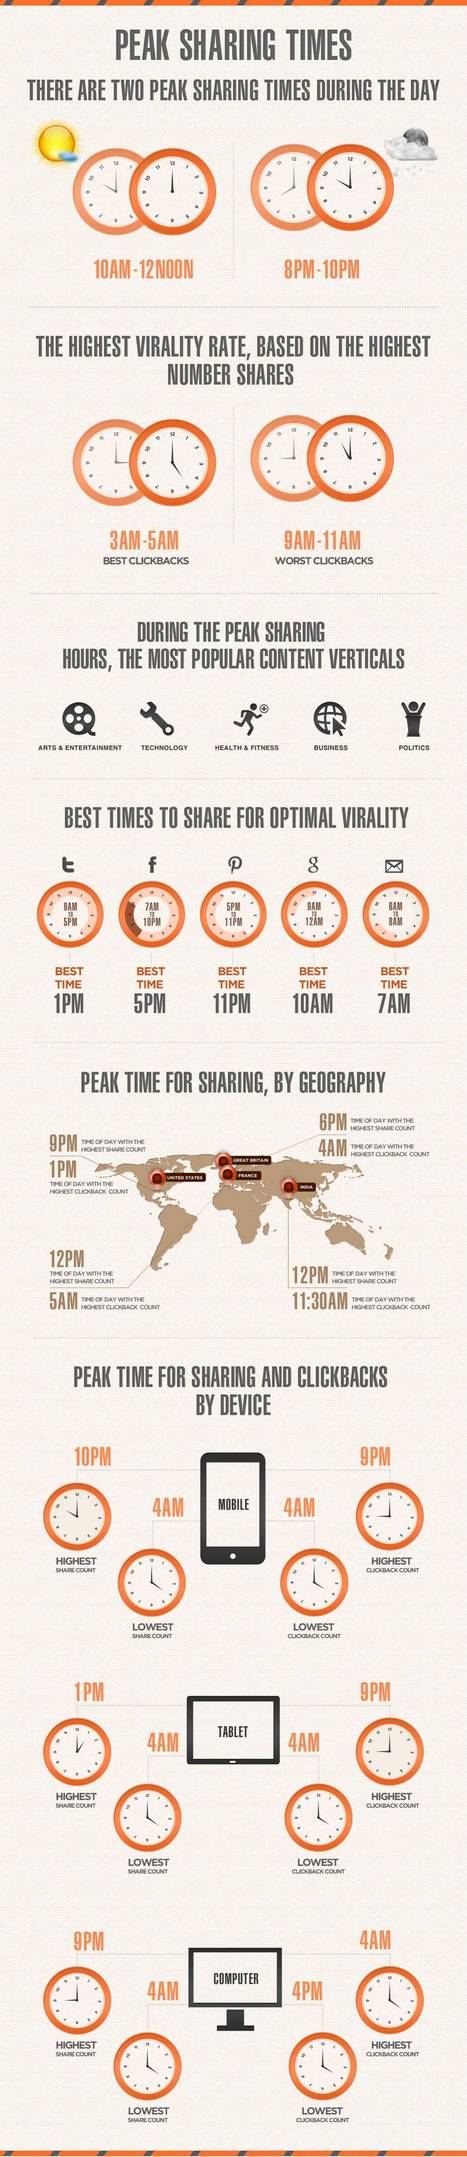 Best Time For Sharing Content [Infographic] | Marketing_me | Scoop.it